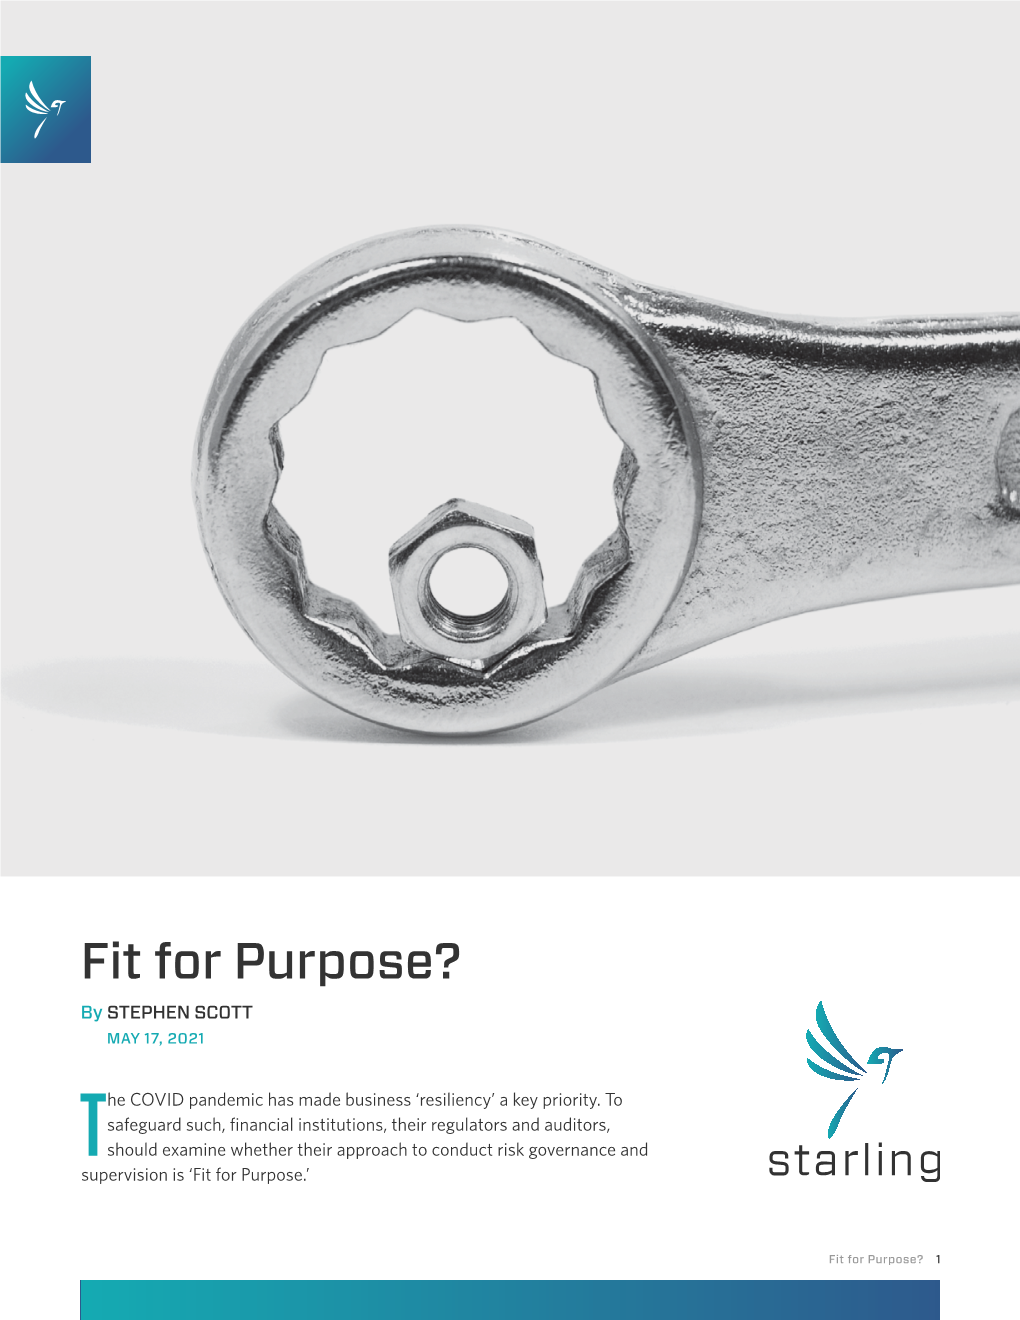 Fit for Purpose? by STEPHEN SCOTT MAY 17, 2021